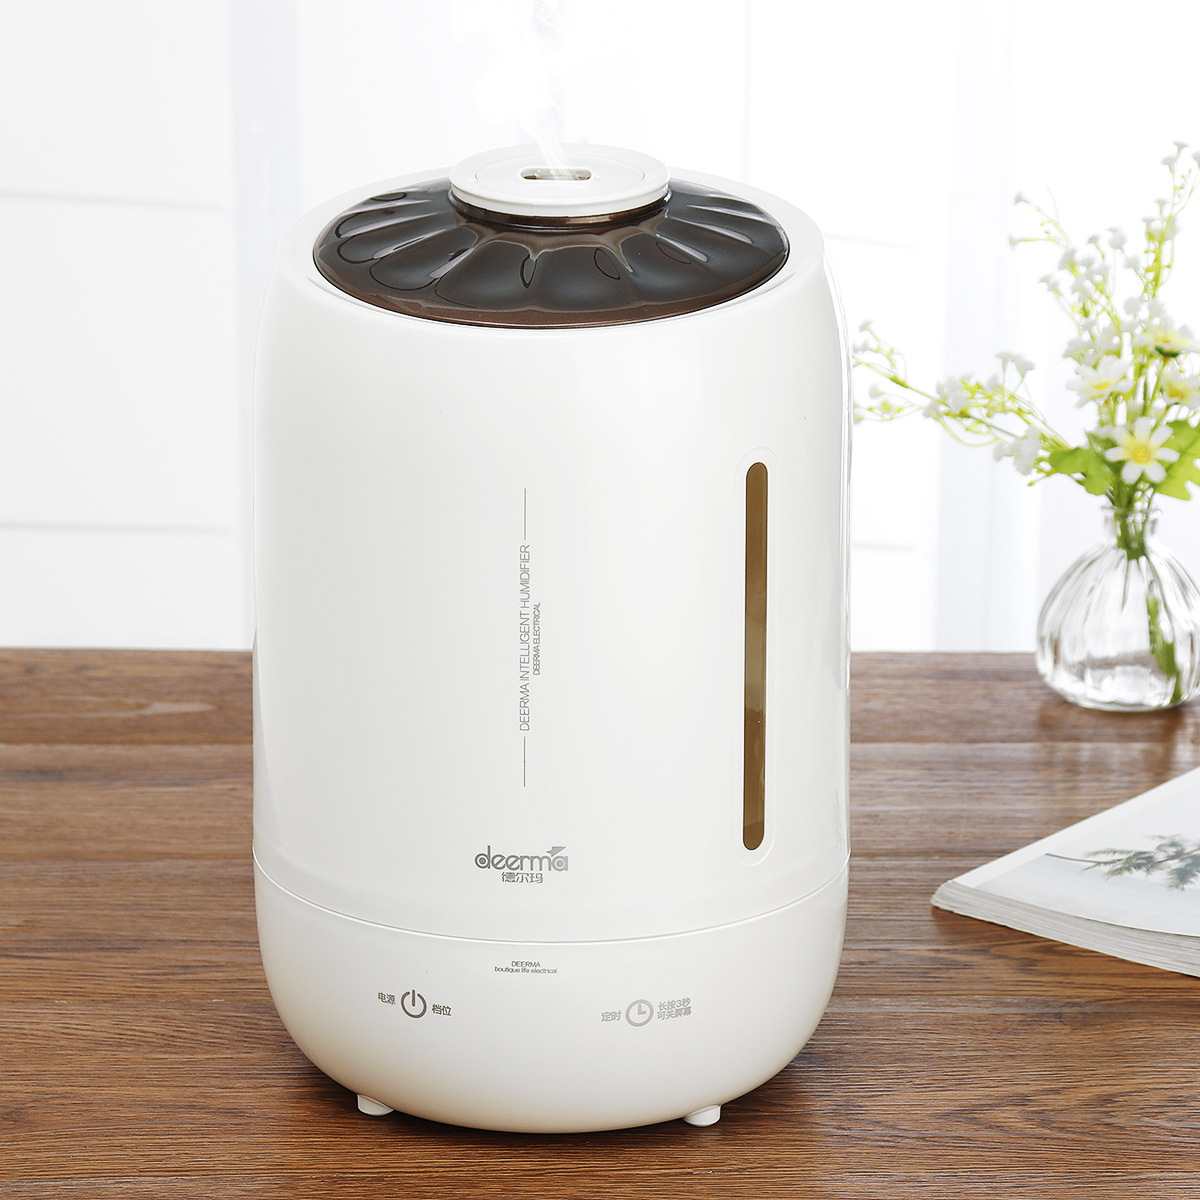 

Deerma DEM-F600 Household Air Humidifier Aroma Diffuser Oil Ultrasonic Fog Touch Screen Home Water Diffuser